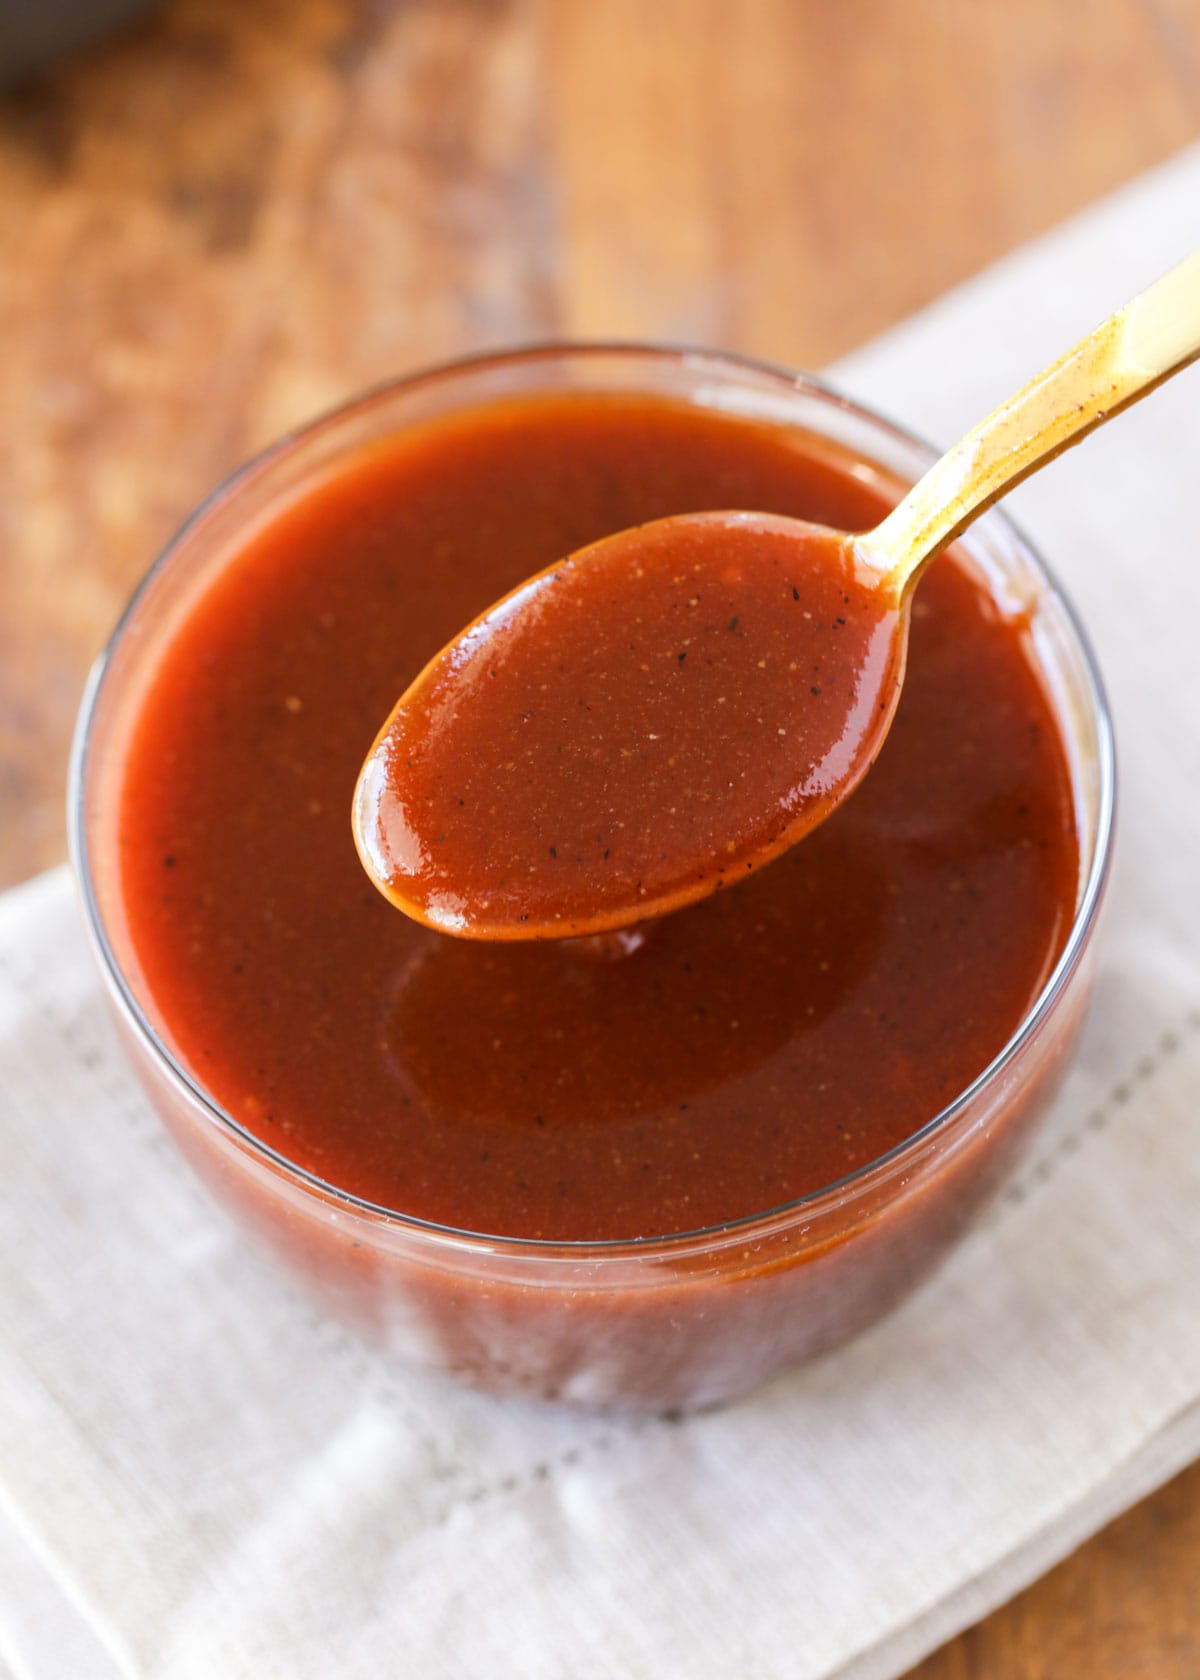 BBQ sauce served in a glass bowl.